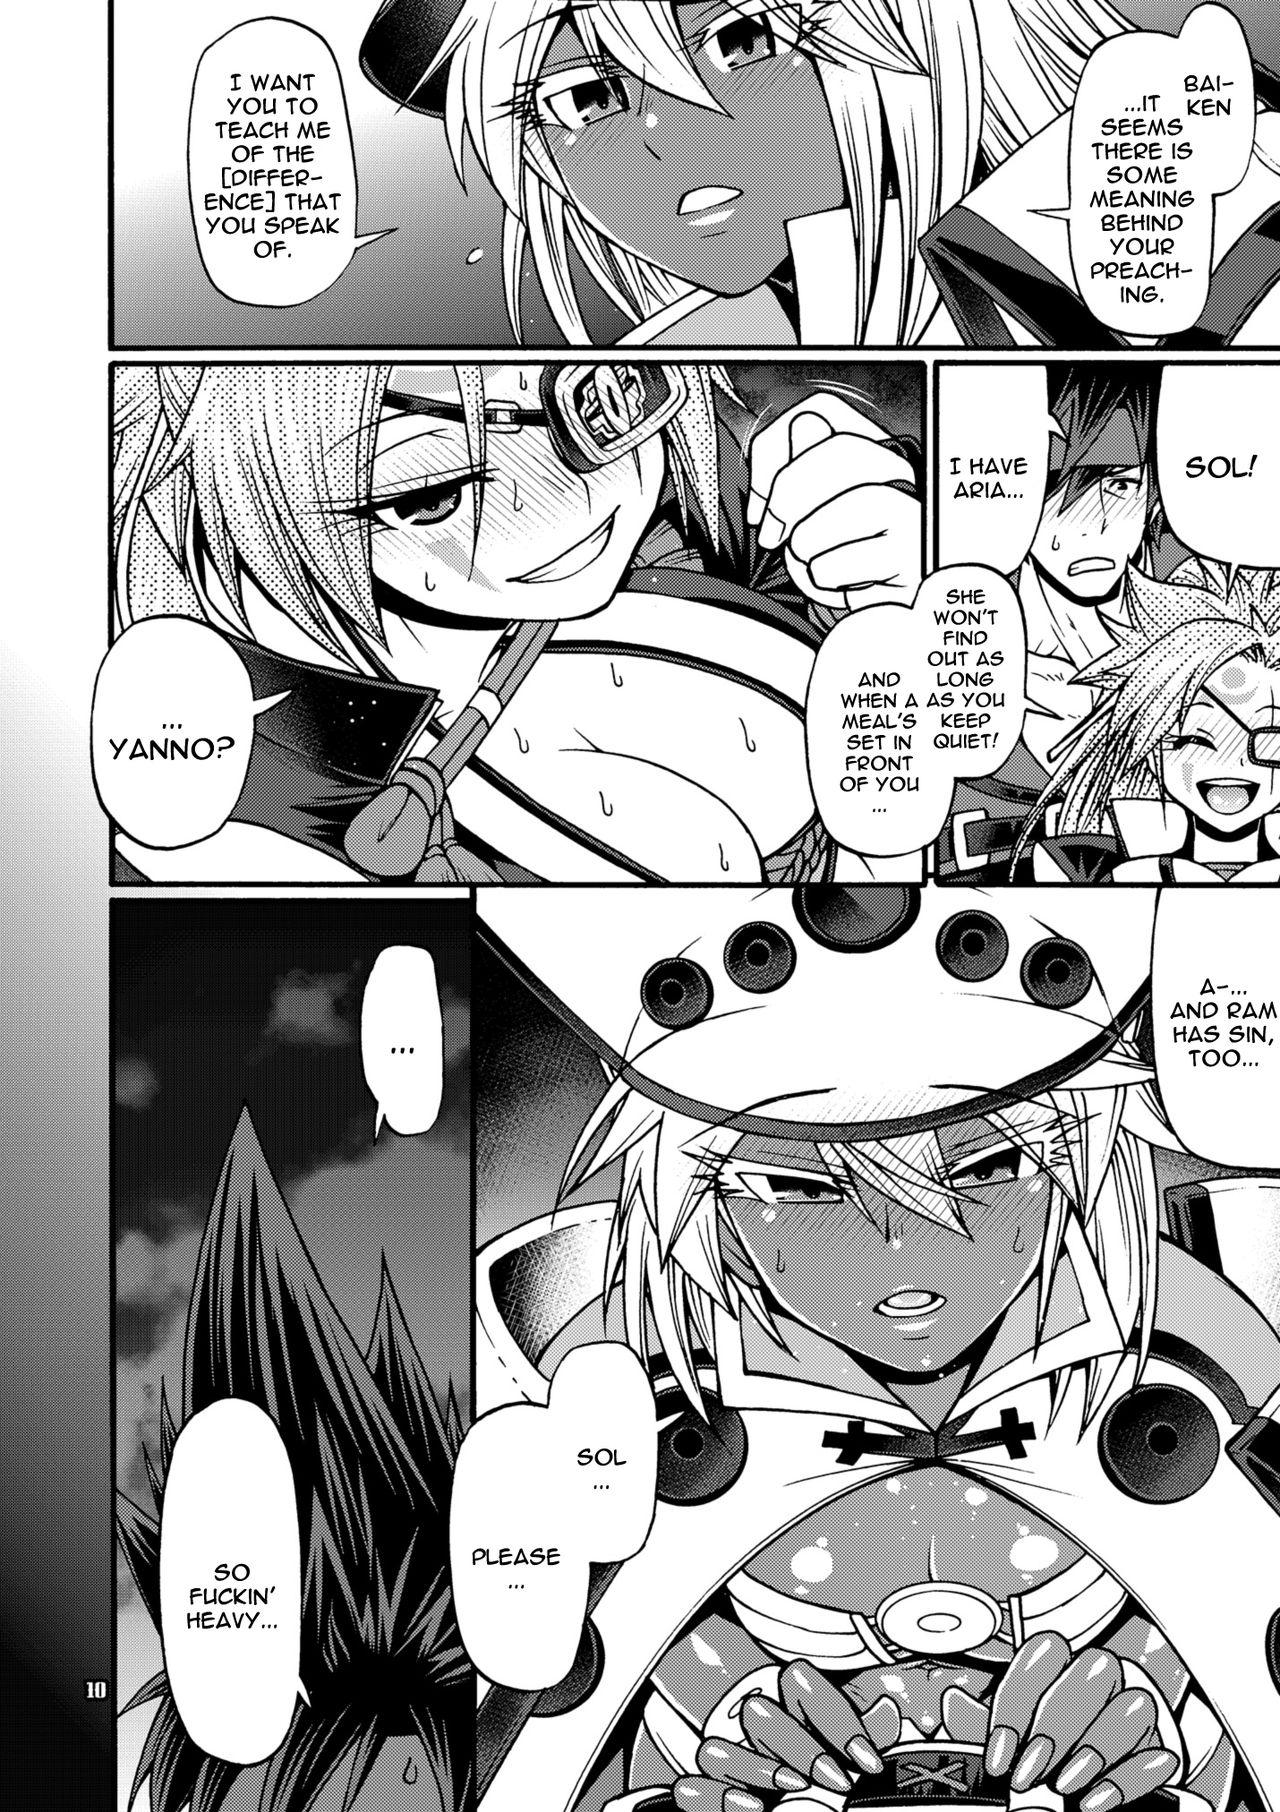 Nalgas Do What You Wanna Do - Guilty gear Anal Fuck - Page 9